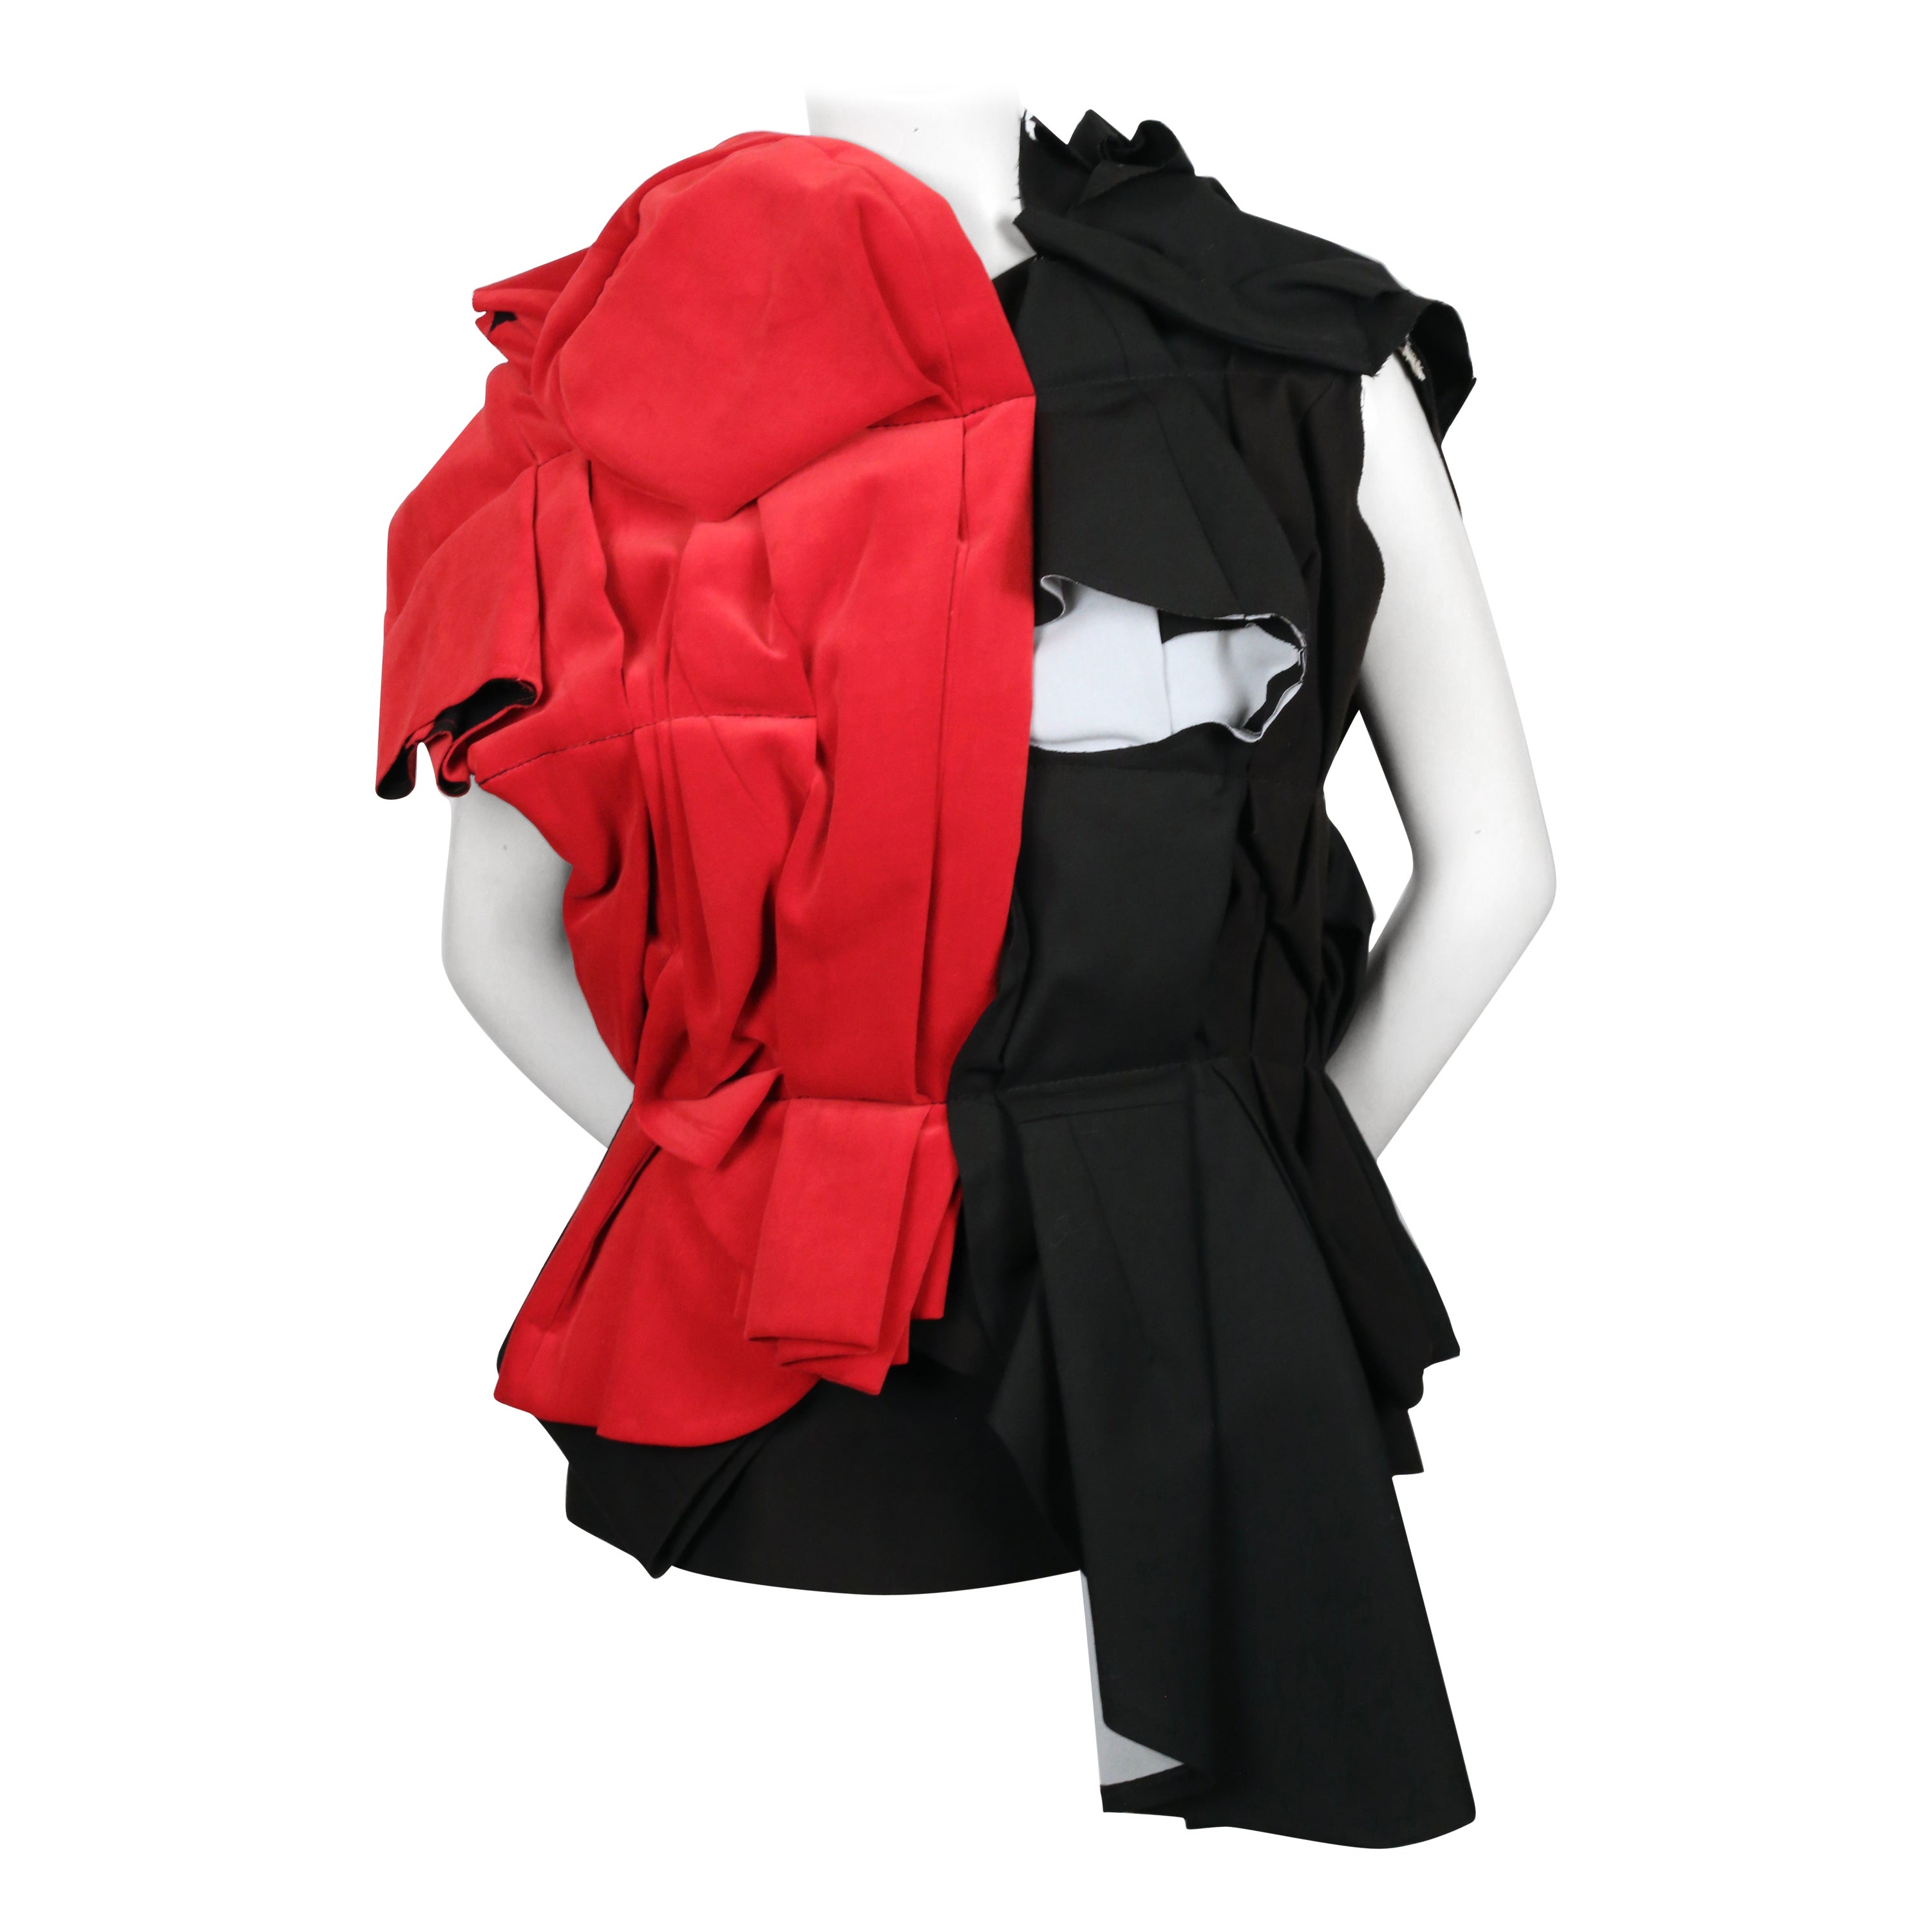 2013 COMME DES GARCONS black and red RUNWAY jacket For Sale